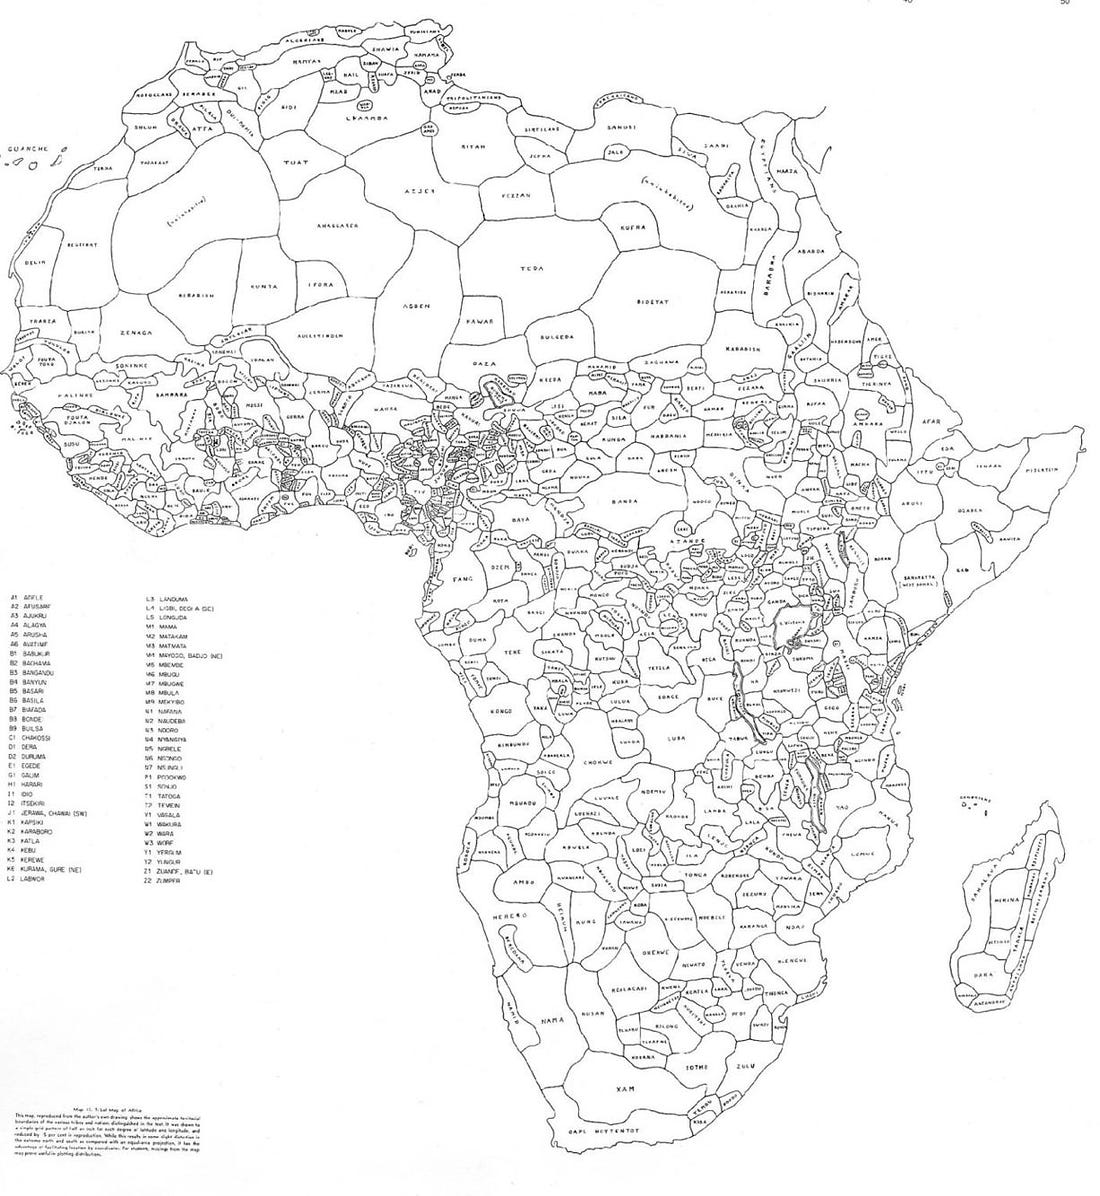 Tribal/linguistic map of Africa